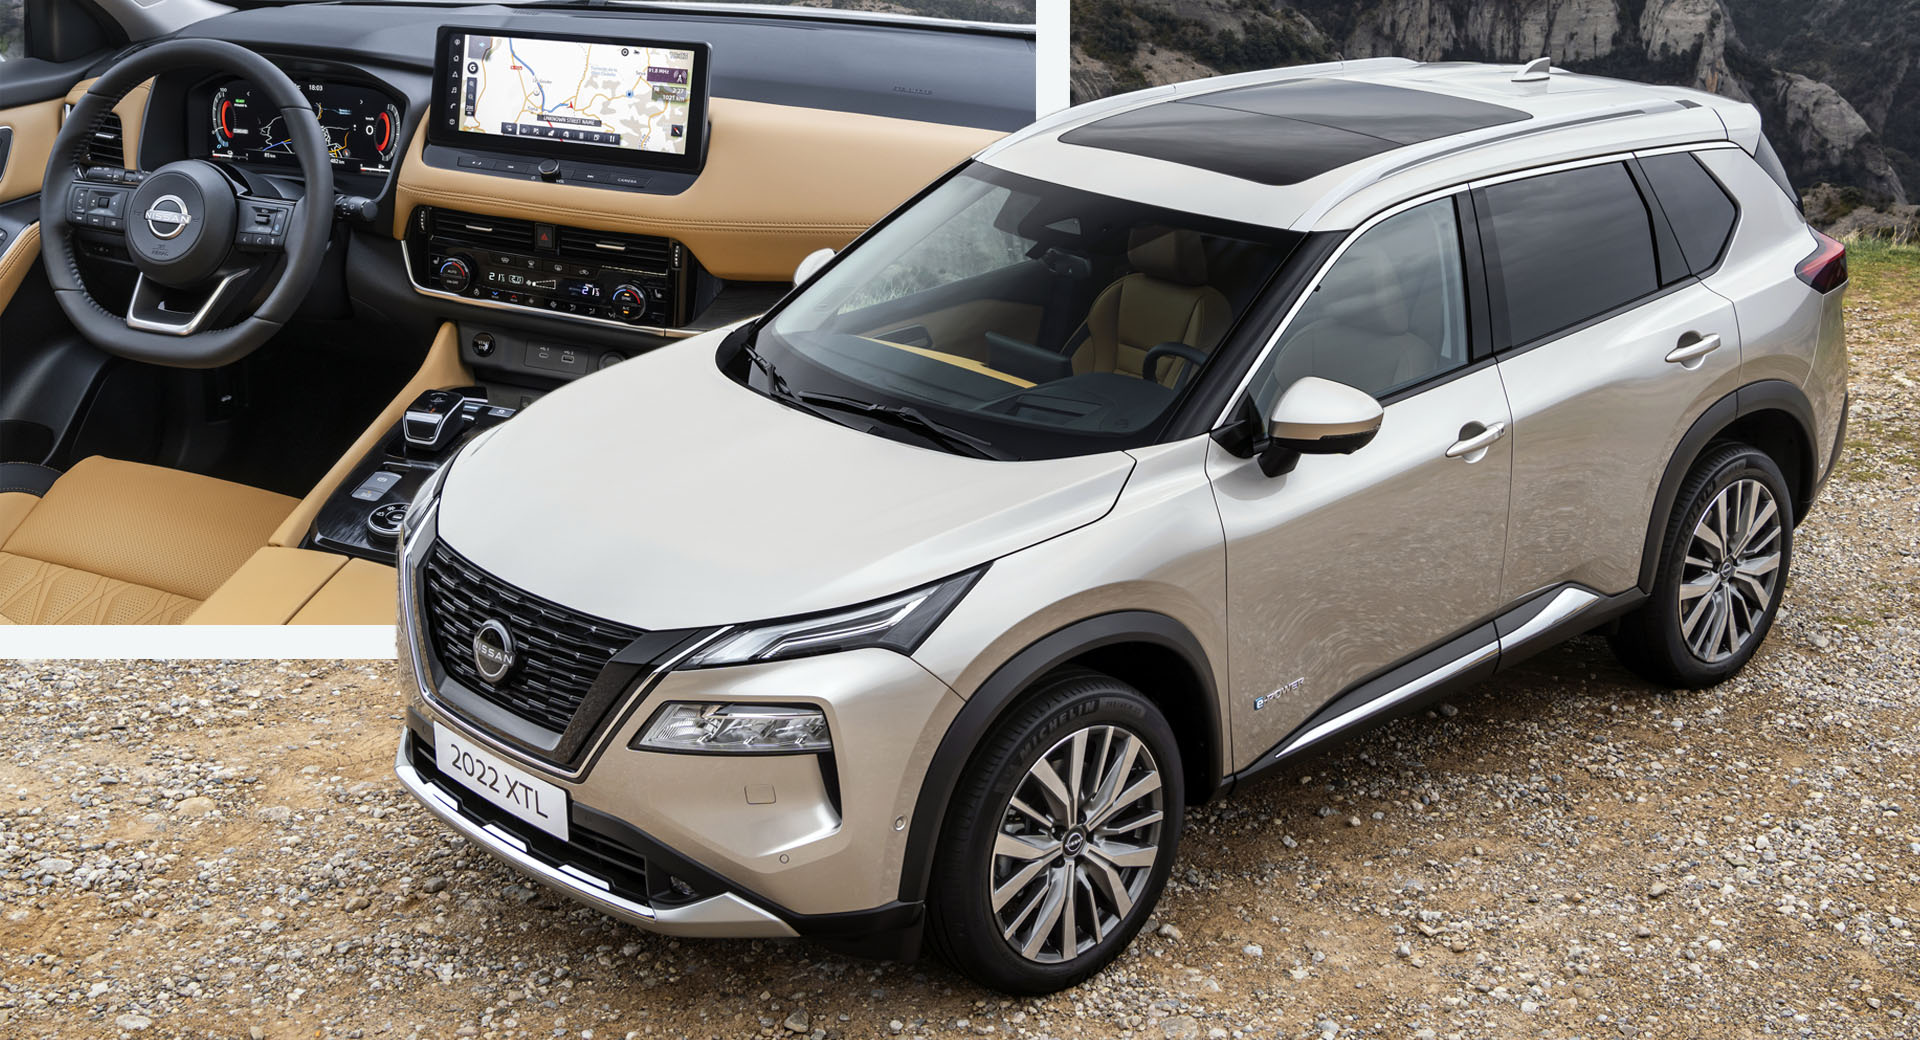 New 2023 Nissan X-Trail Revealed For Europe With Electrified